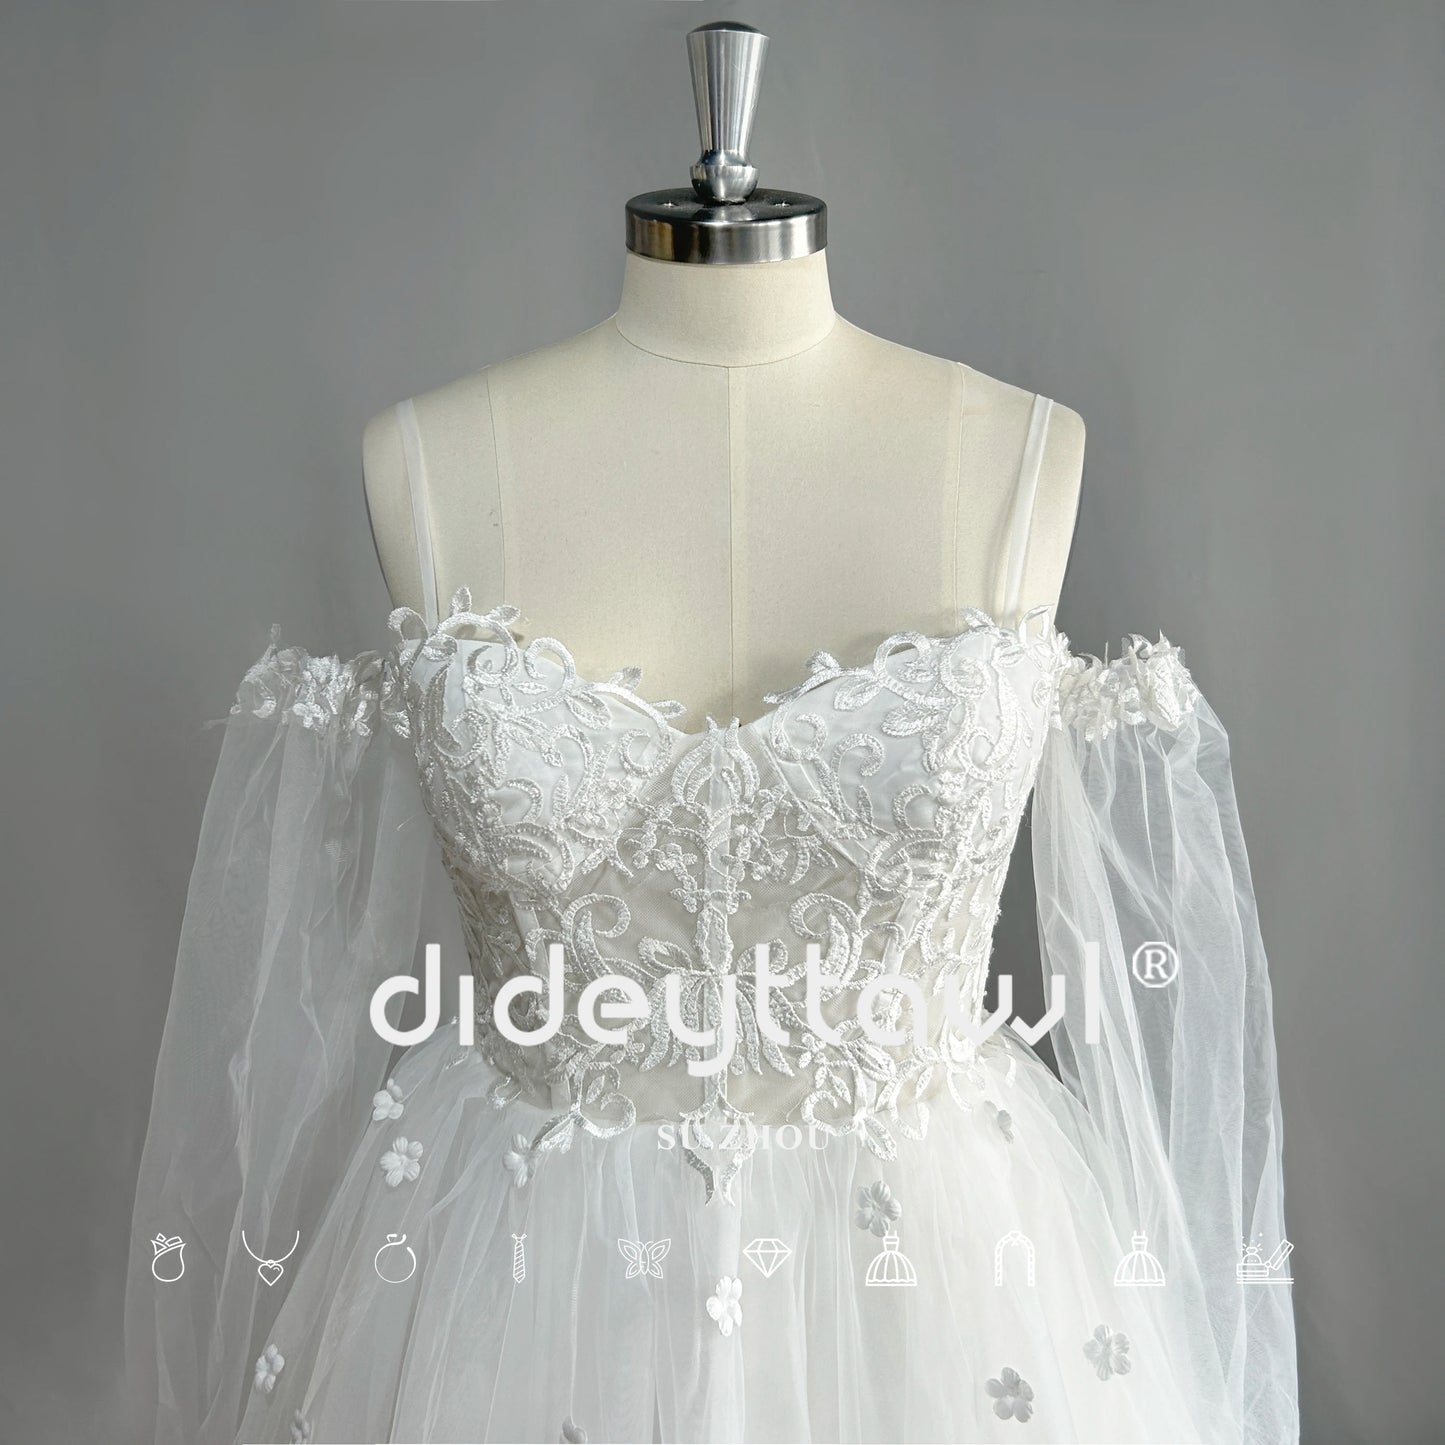 DIDEYTTAWL Sweetheart Long Sleeves Tulle Short Wedding Dress Mini Length Off Shoulder Bridal Gown Real Picture